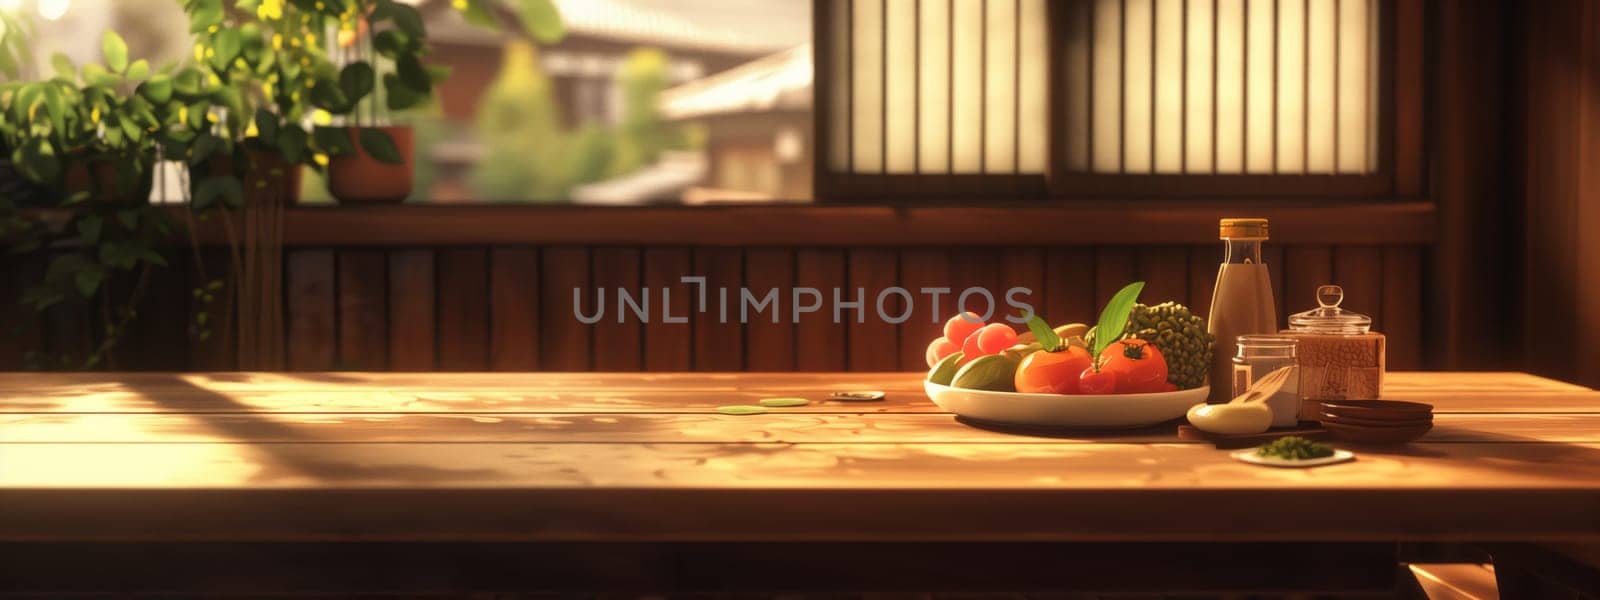 A wooden table with a bowl of fresh fruit and vegetables, enhancing the rooms hardwood flooring. Perfect for preparing a healthy recipe with natural ingredients from the plant kingdom